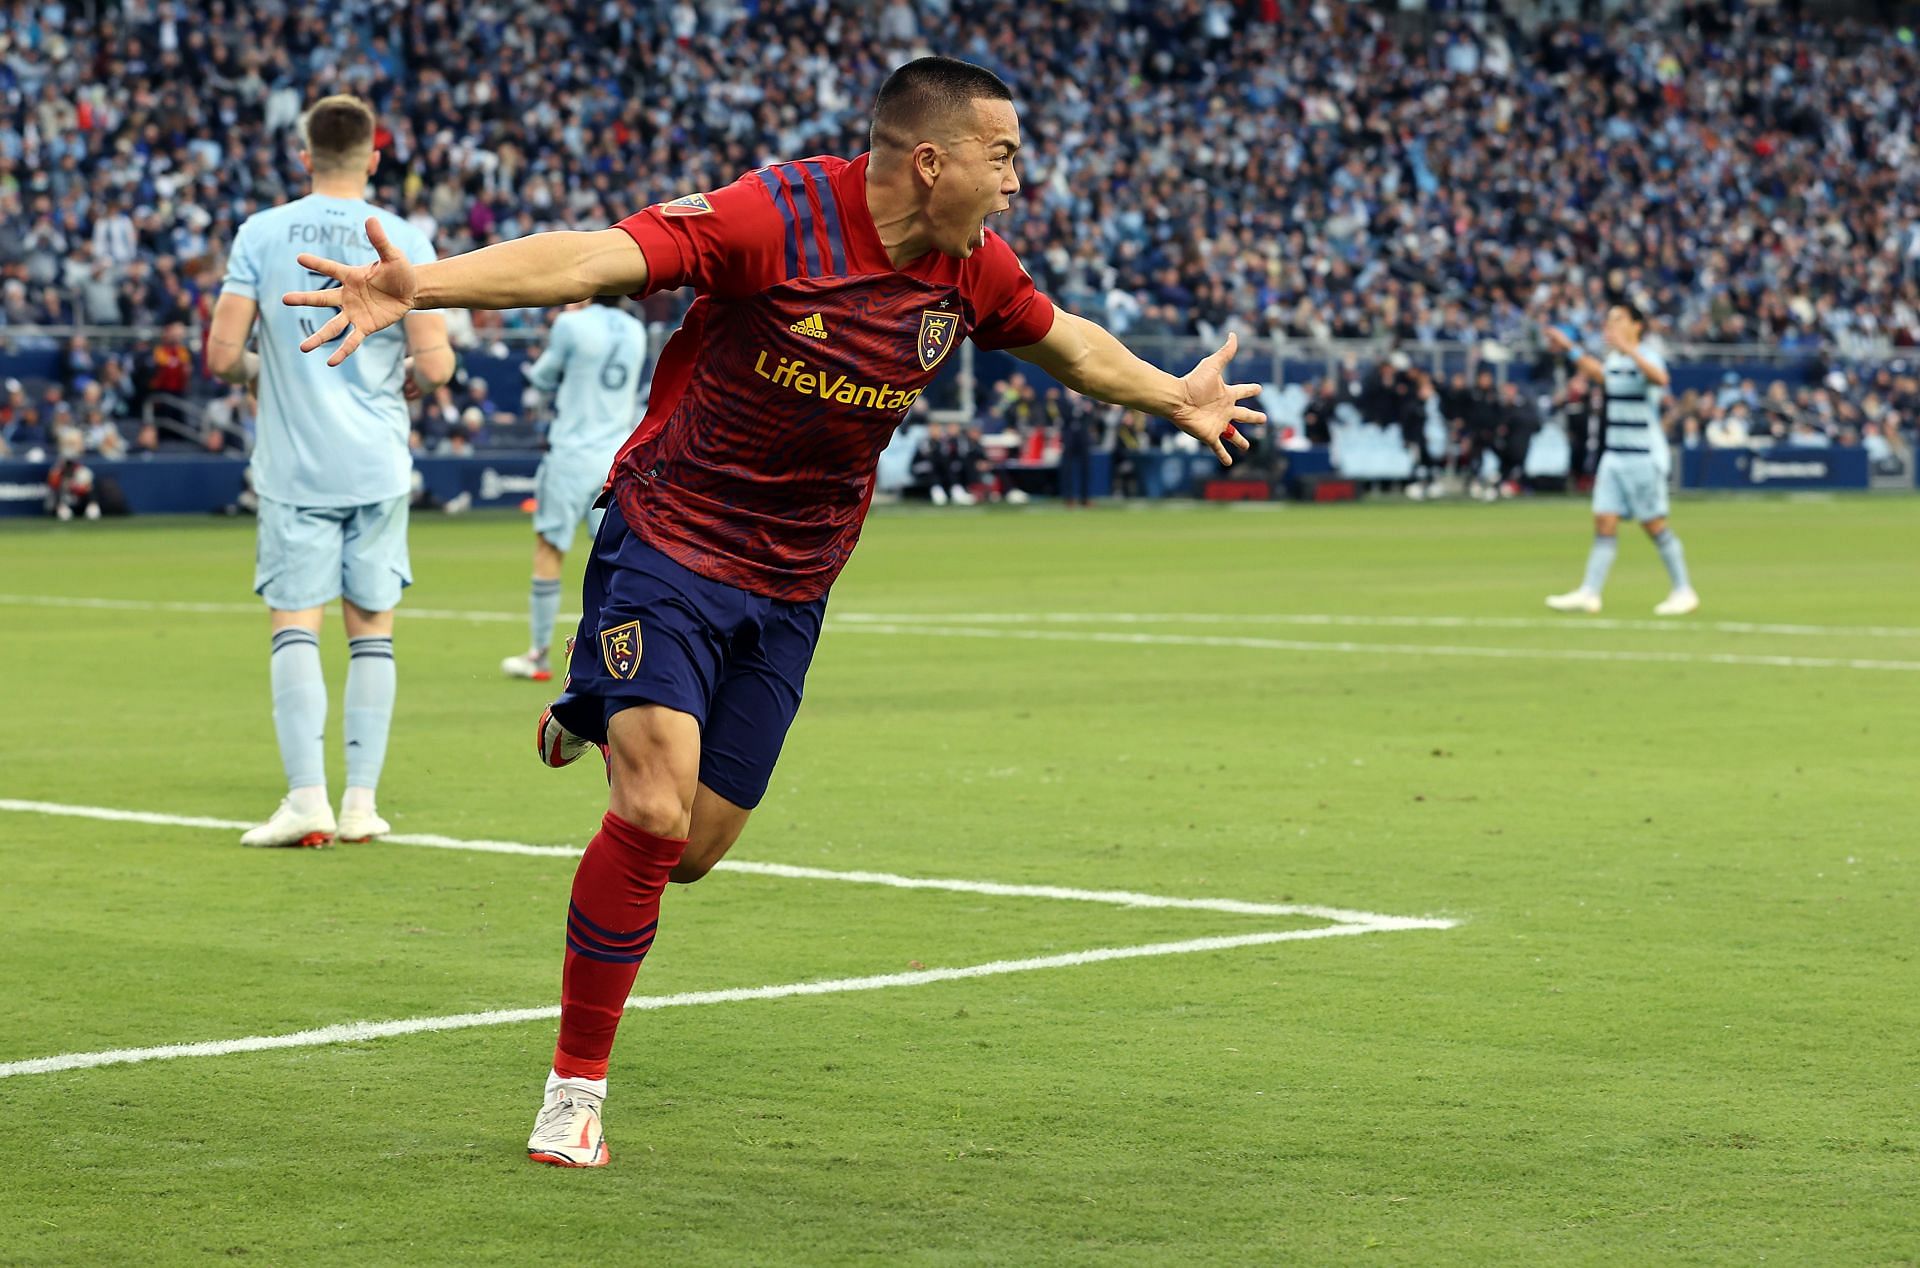 Real Salt Lake face Nashville in their upcoming MLS fixture on Saturday